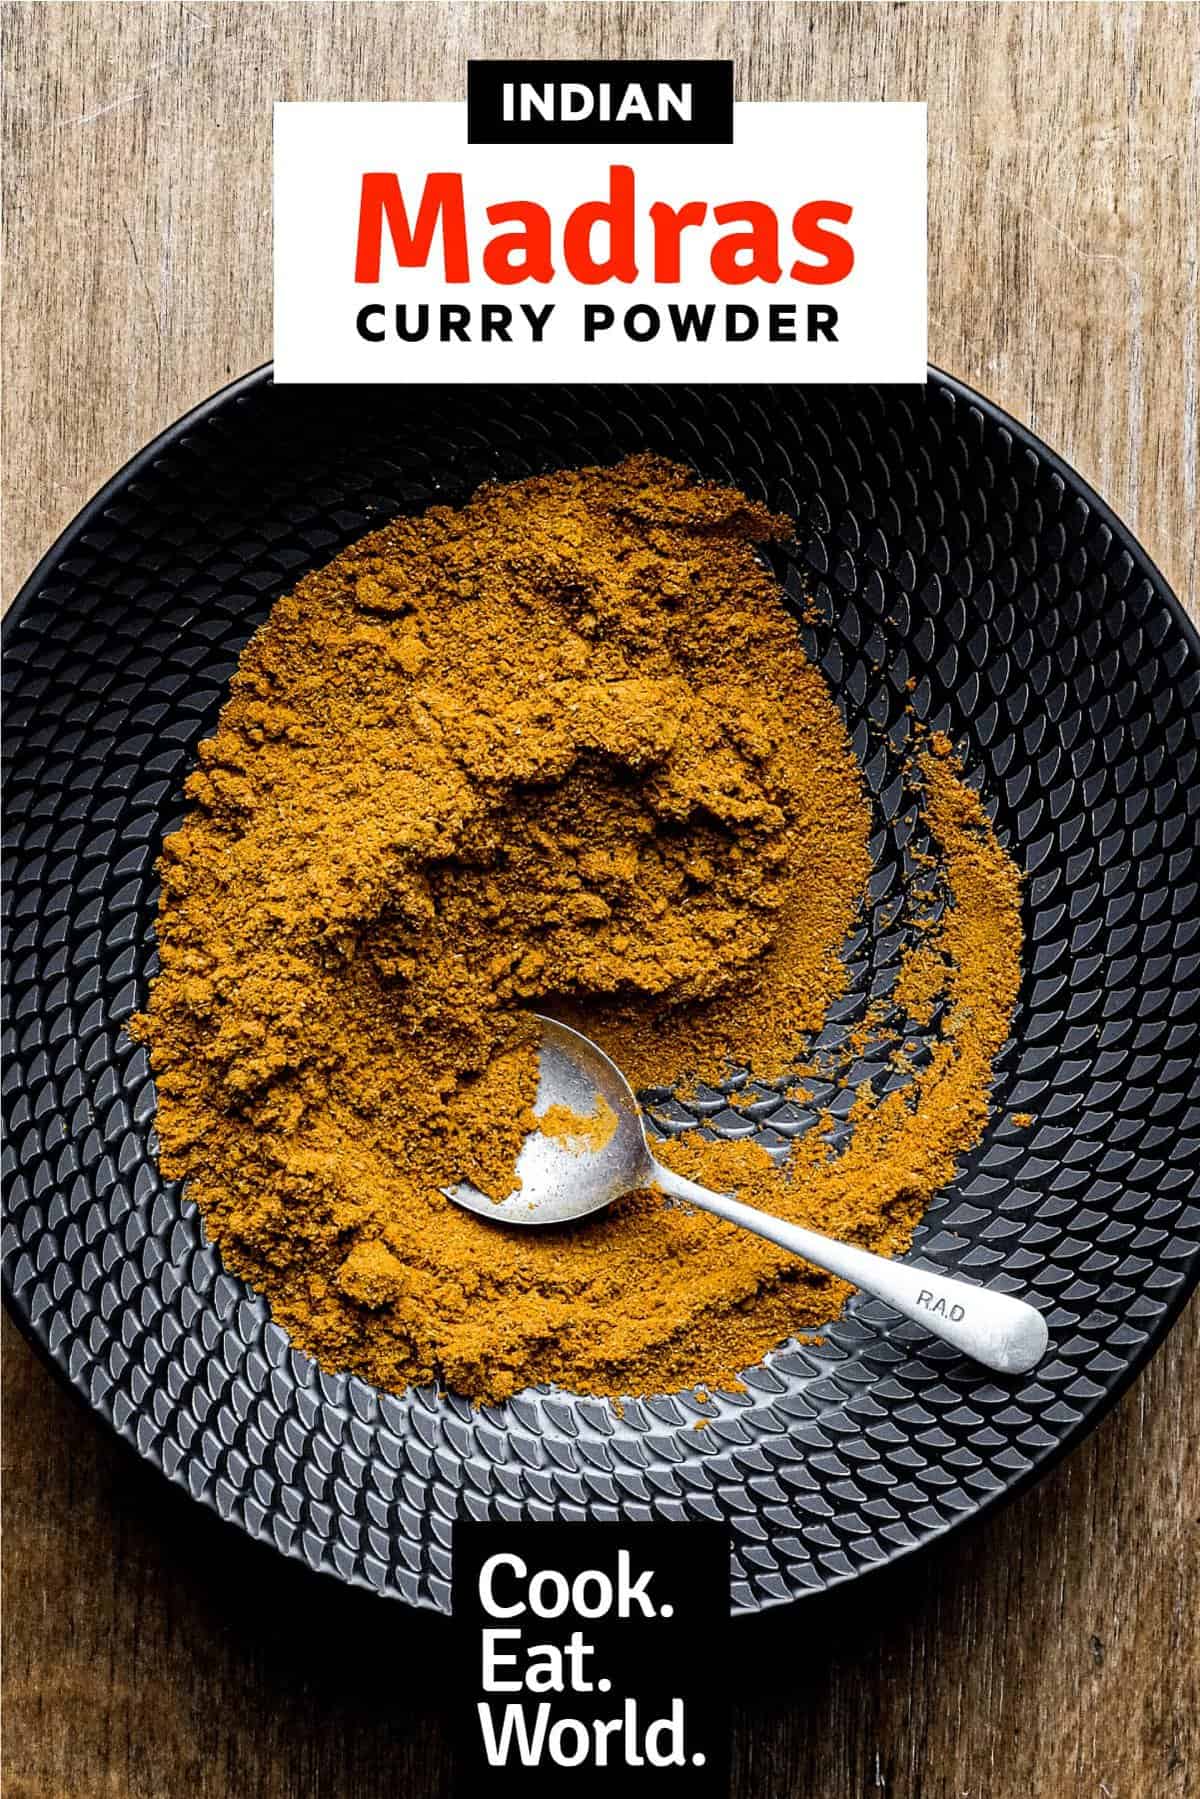 A black bowl of Madras Curry Powder on a wooden surface with a small spoon.